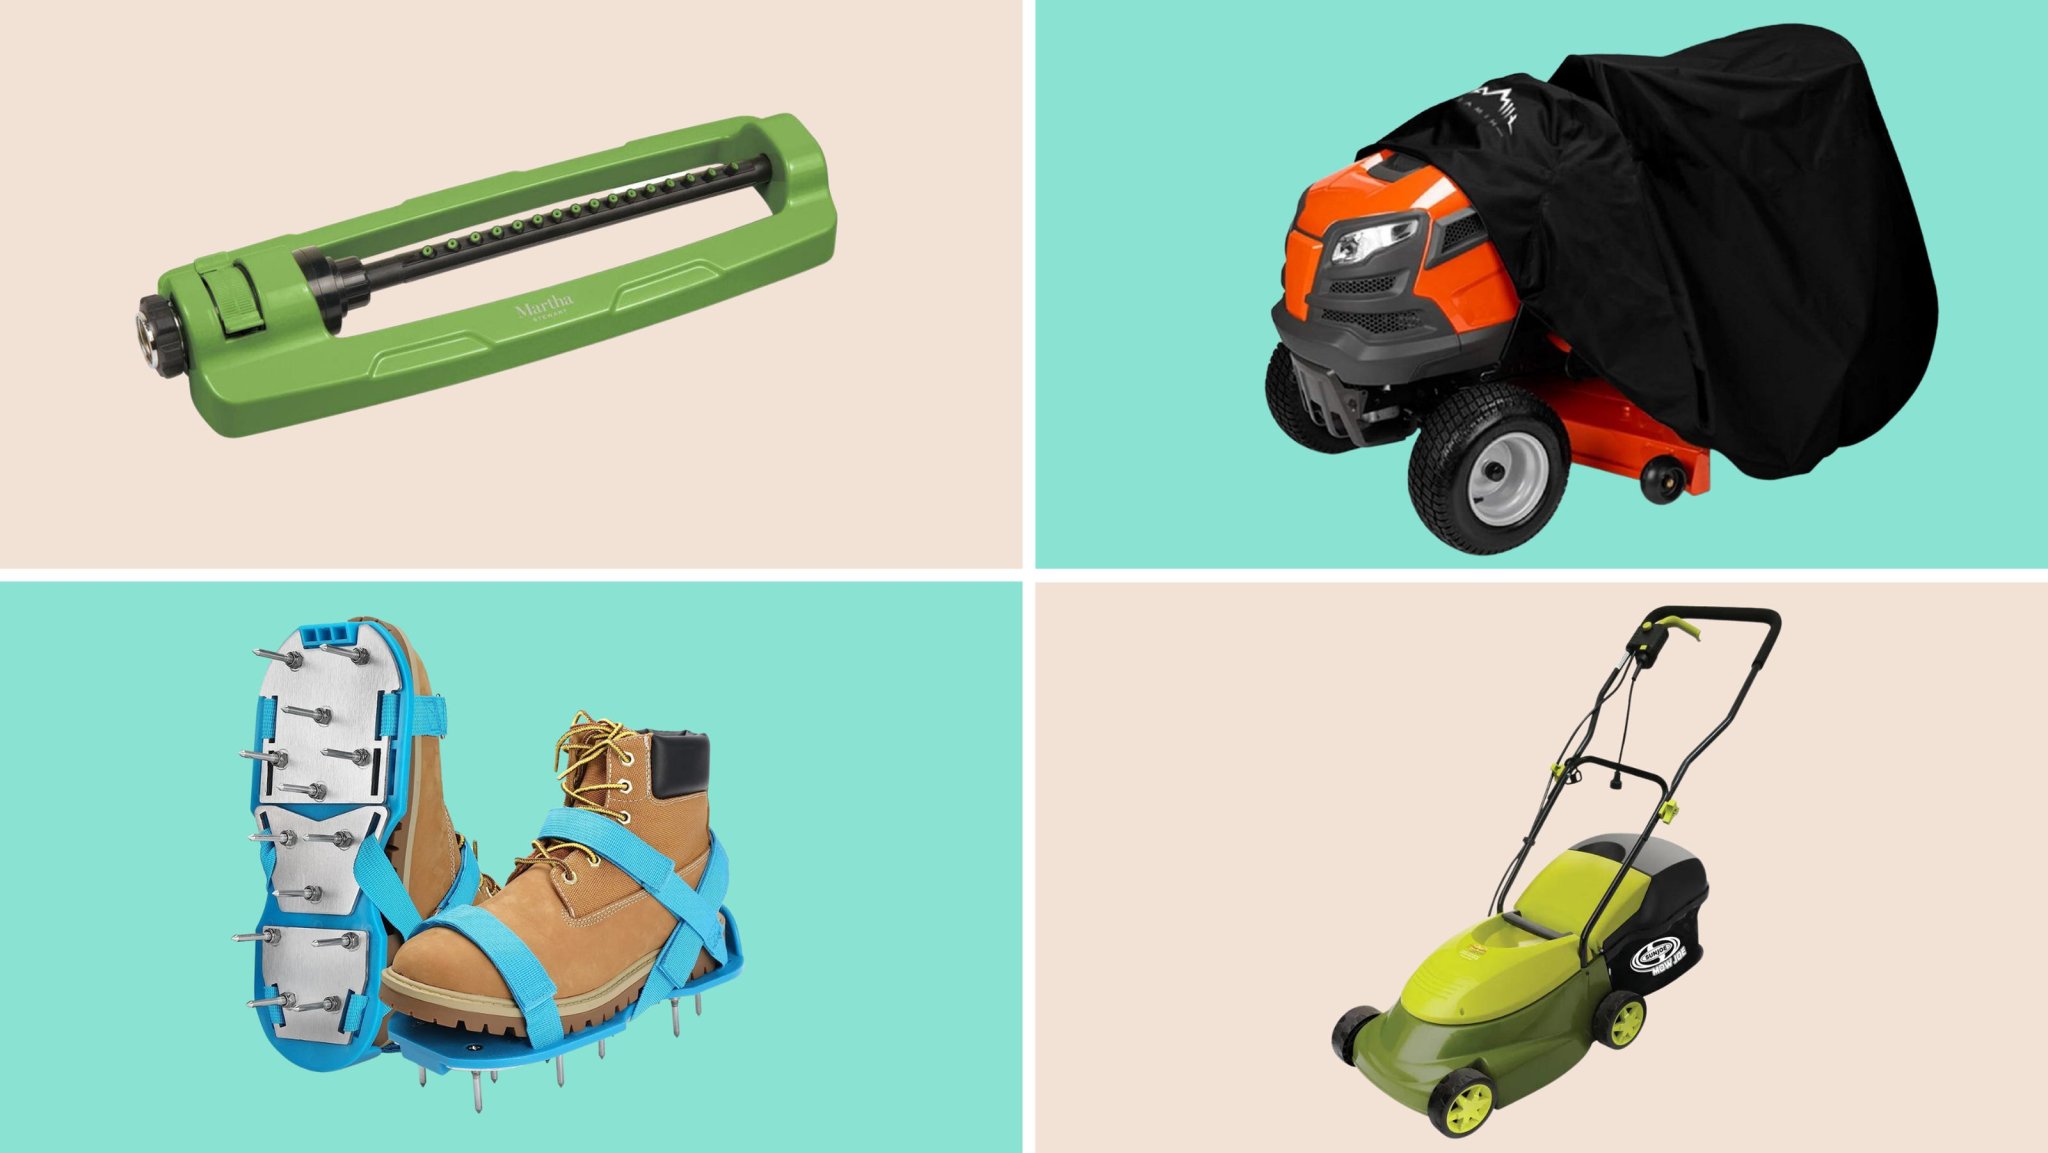 Garden smarter with the 10 best lawn equipment deals at Amazon, Lowe's and Walmart